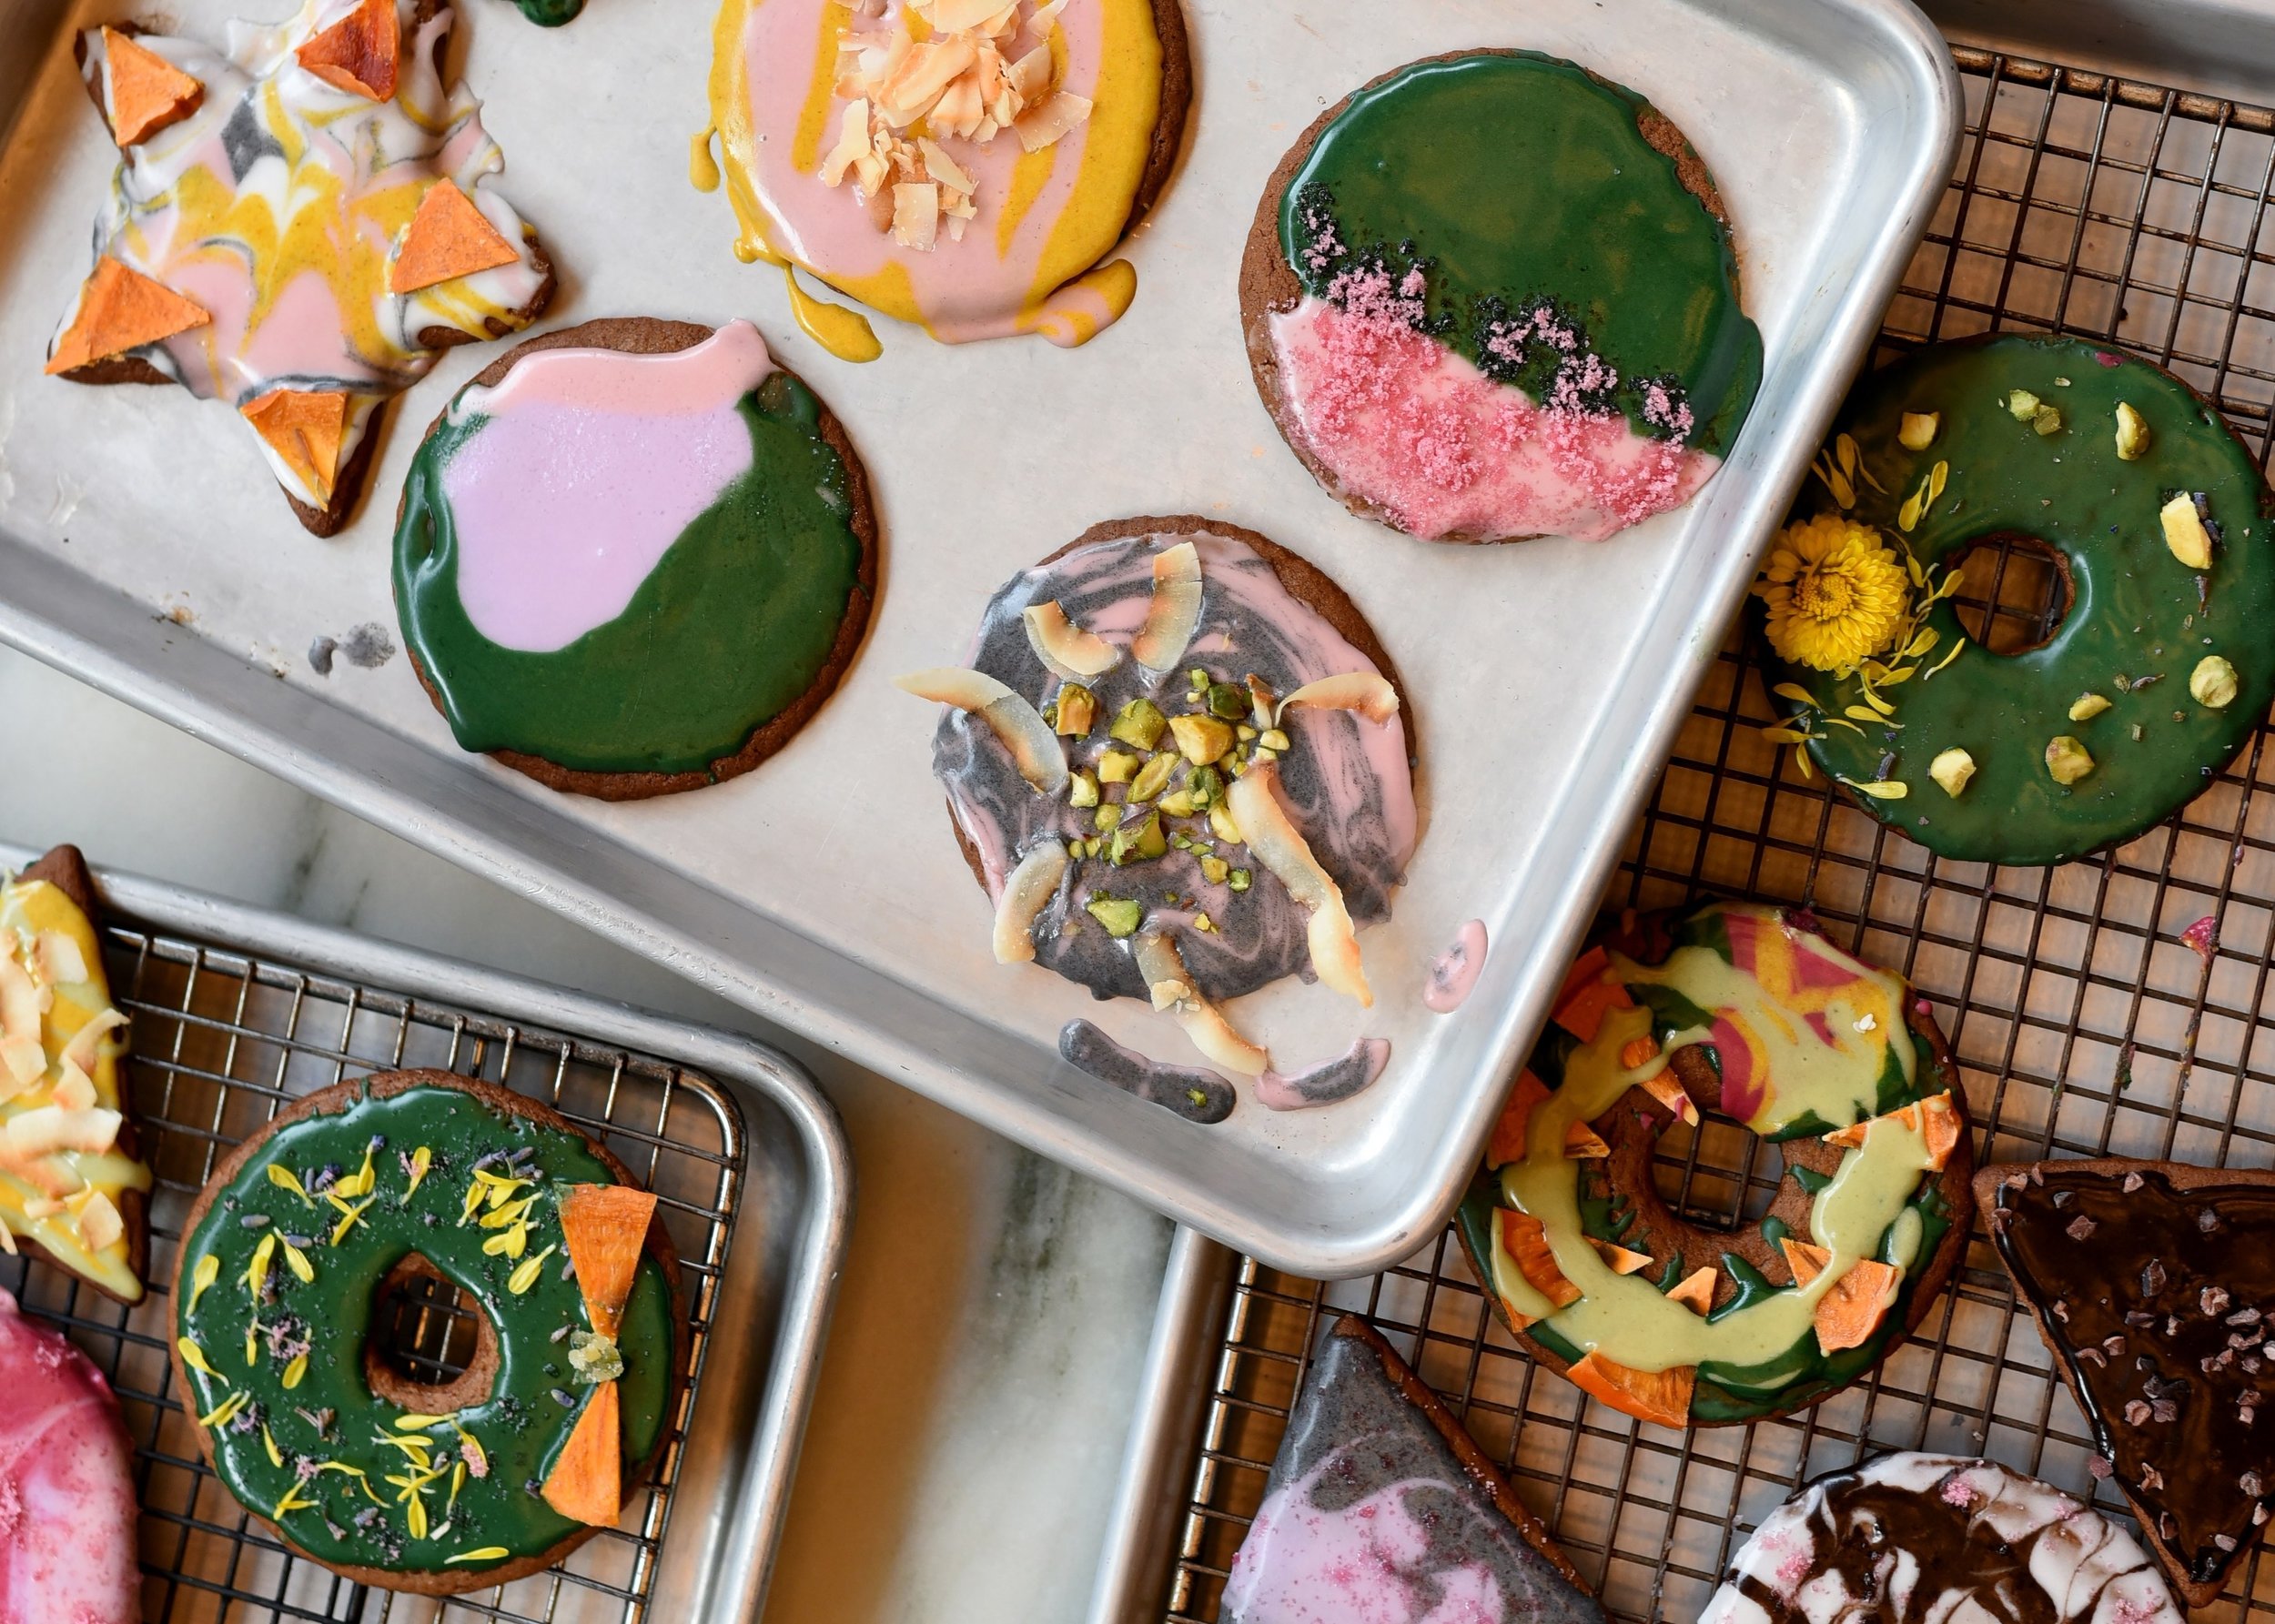  New York’s Coolest Pastry Chef Explains How to Make All-Natural Food Coloring for Holiday Cookies    Vogue   